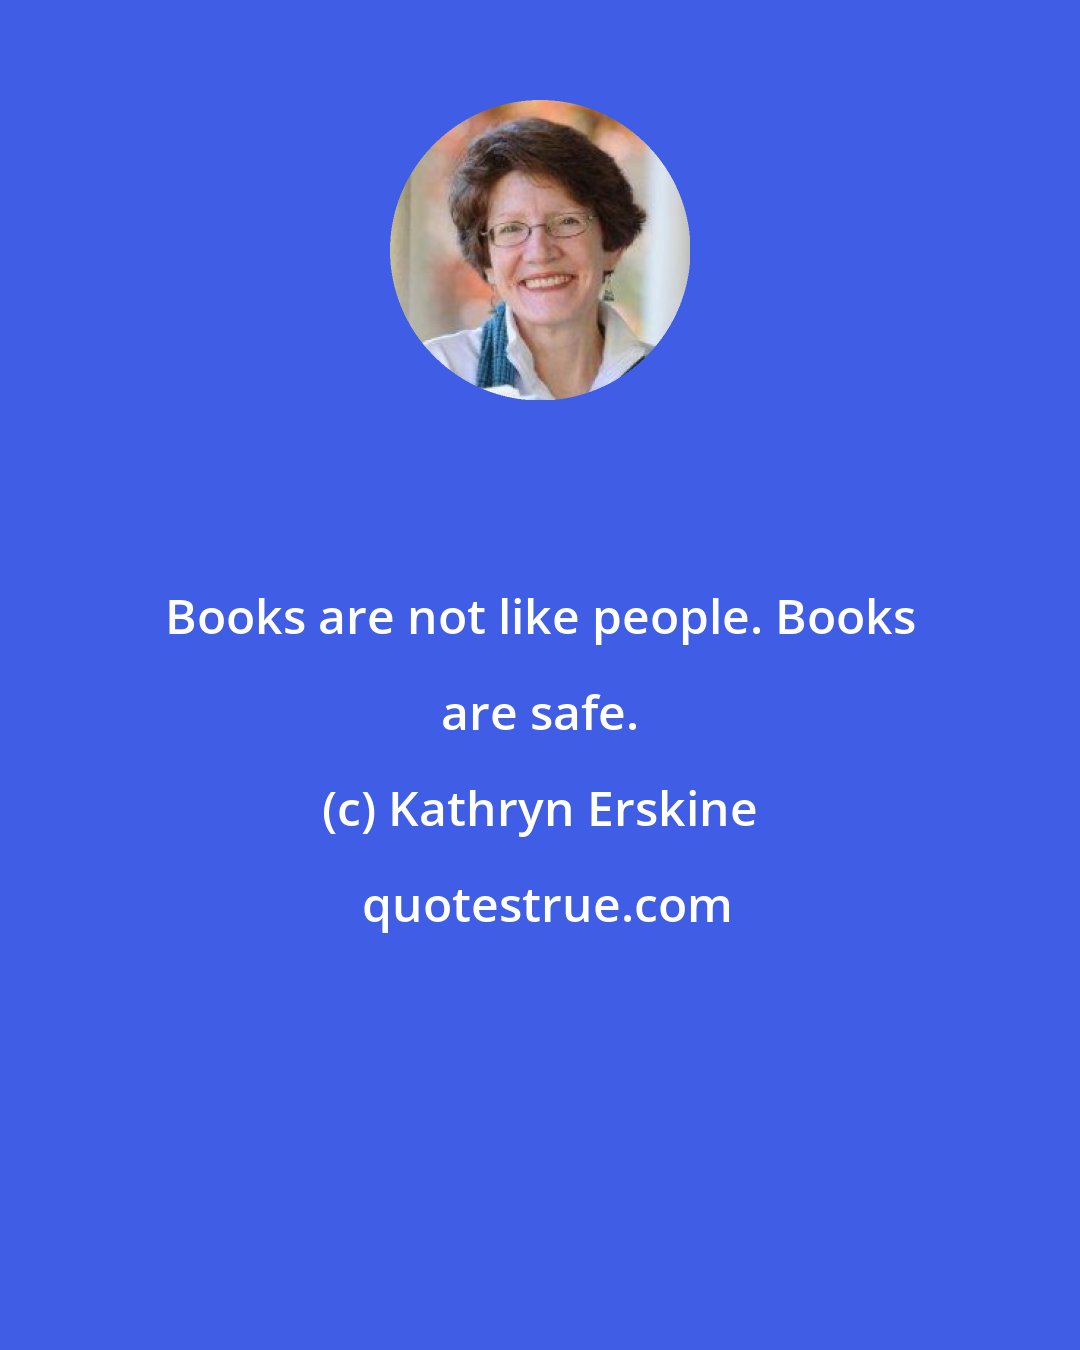 Kathryn Erskine: Books are not like people. Books are safe.